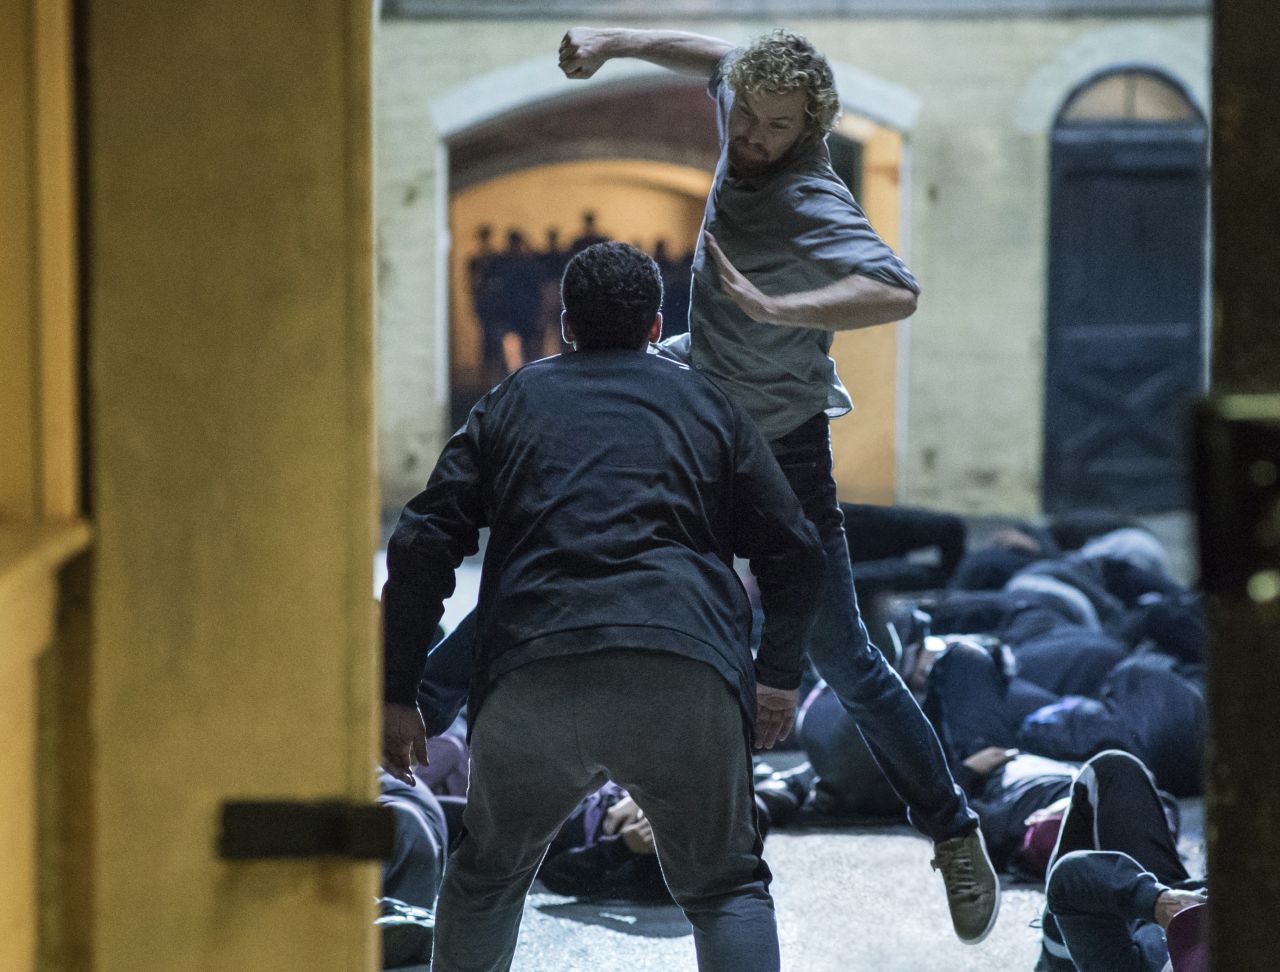 Marvel's "Iron Fist" series on Netflix also caught heat for having "Game Of Thrones" actor Finn Jones star as a martial arts expert.